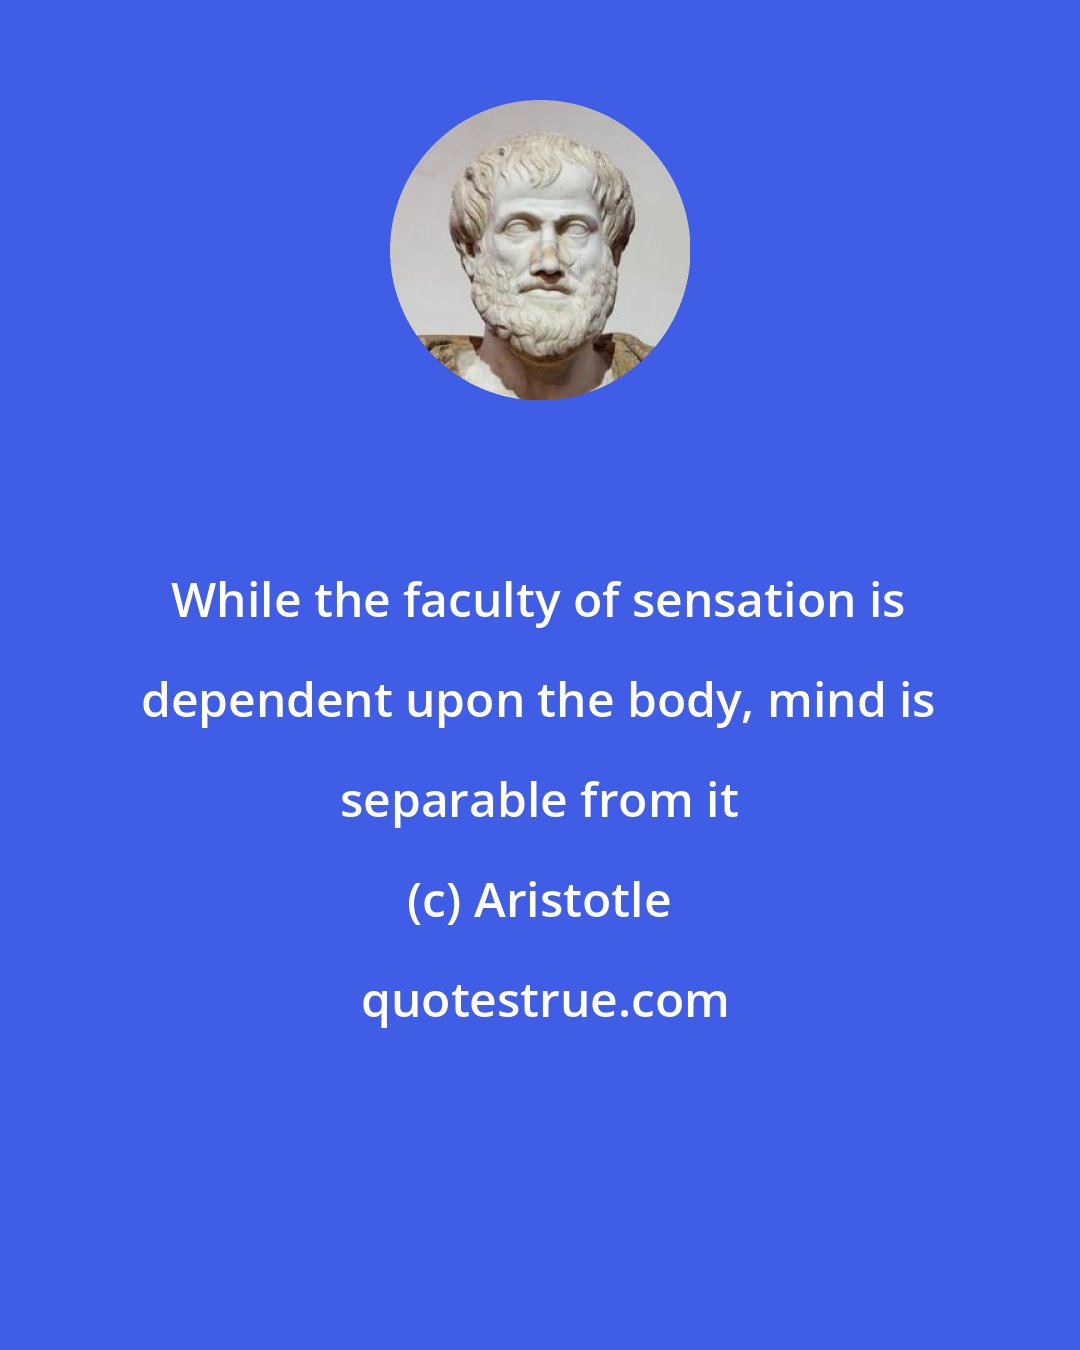 Aristotle: While the faculty of sensation is dependent upon the body, mind is separable from it